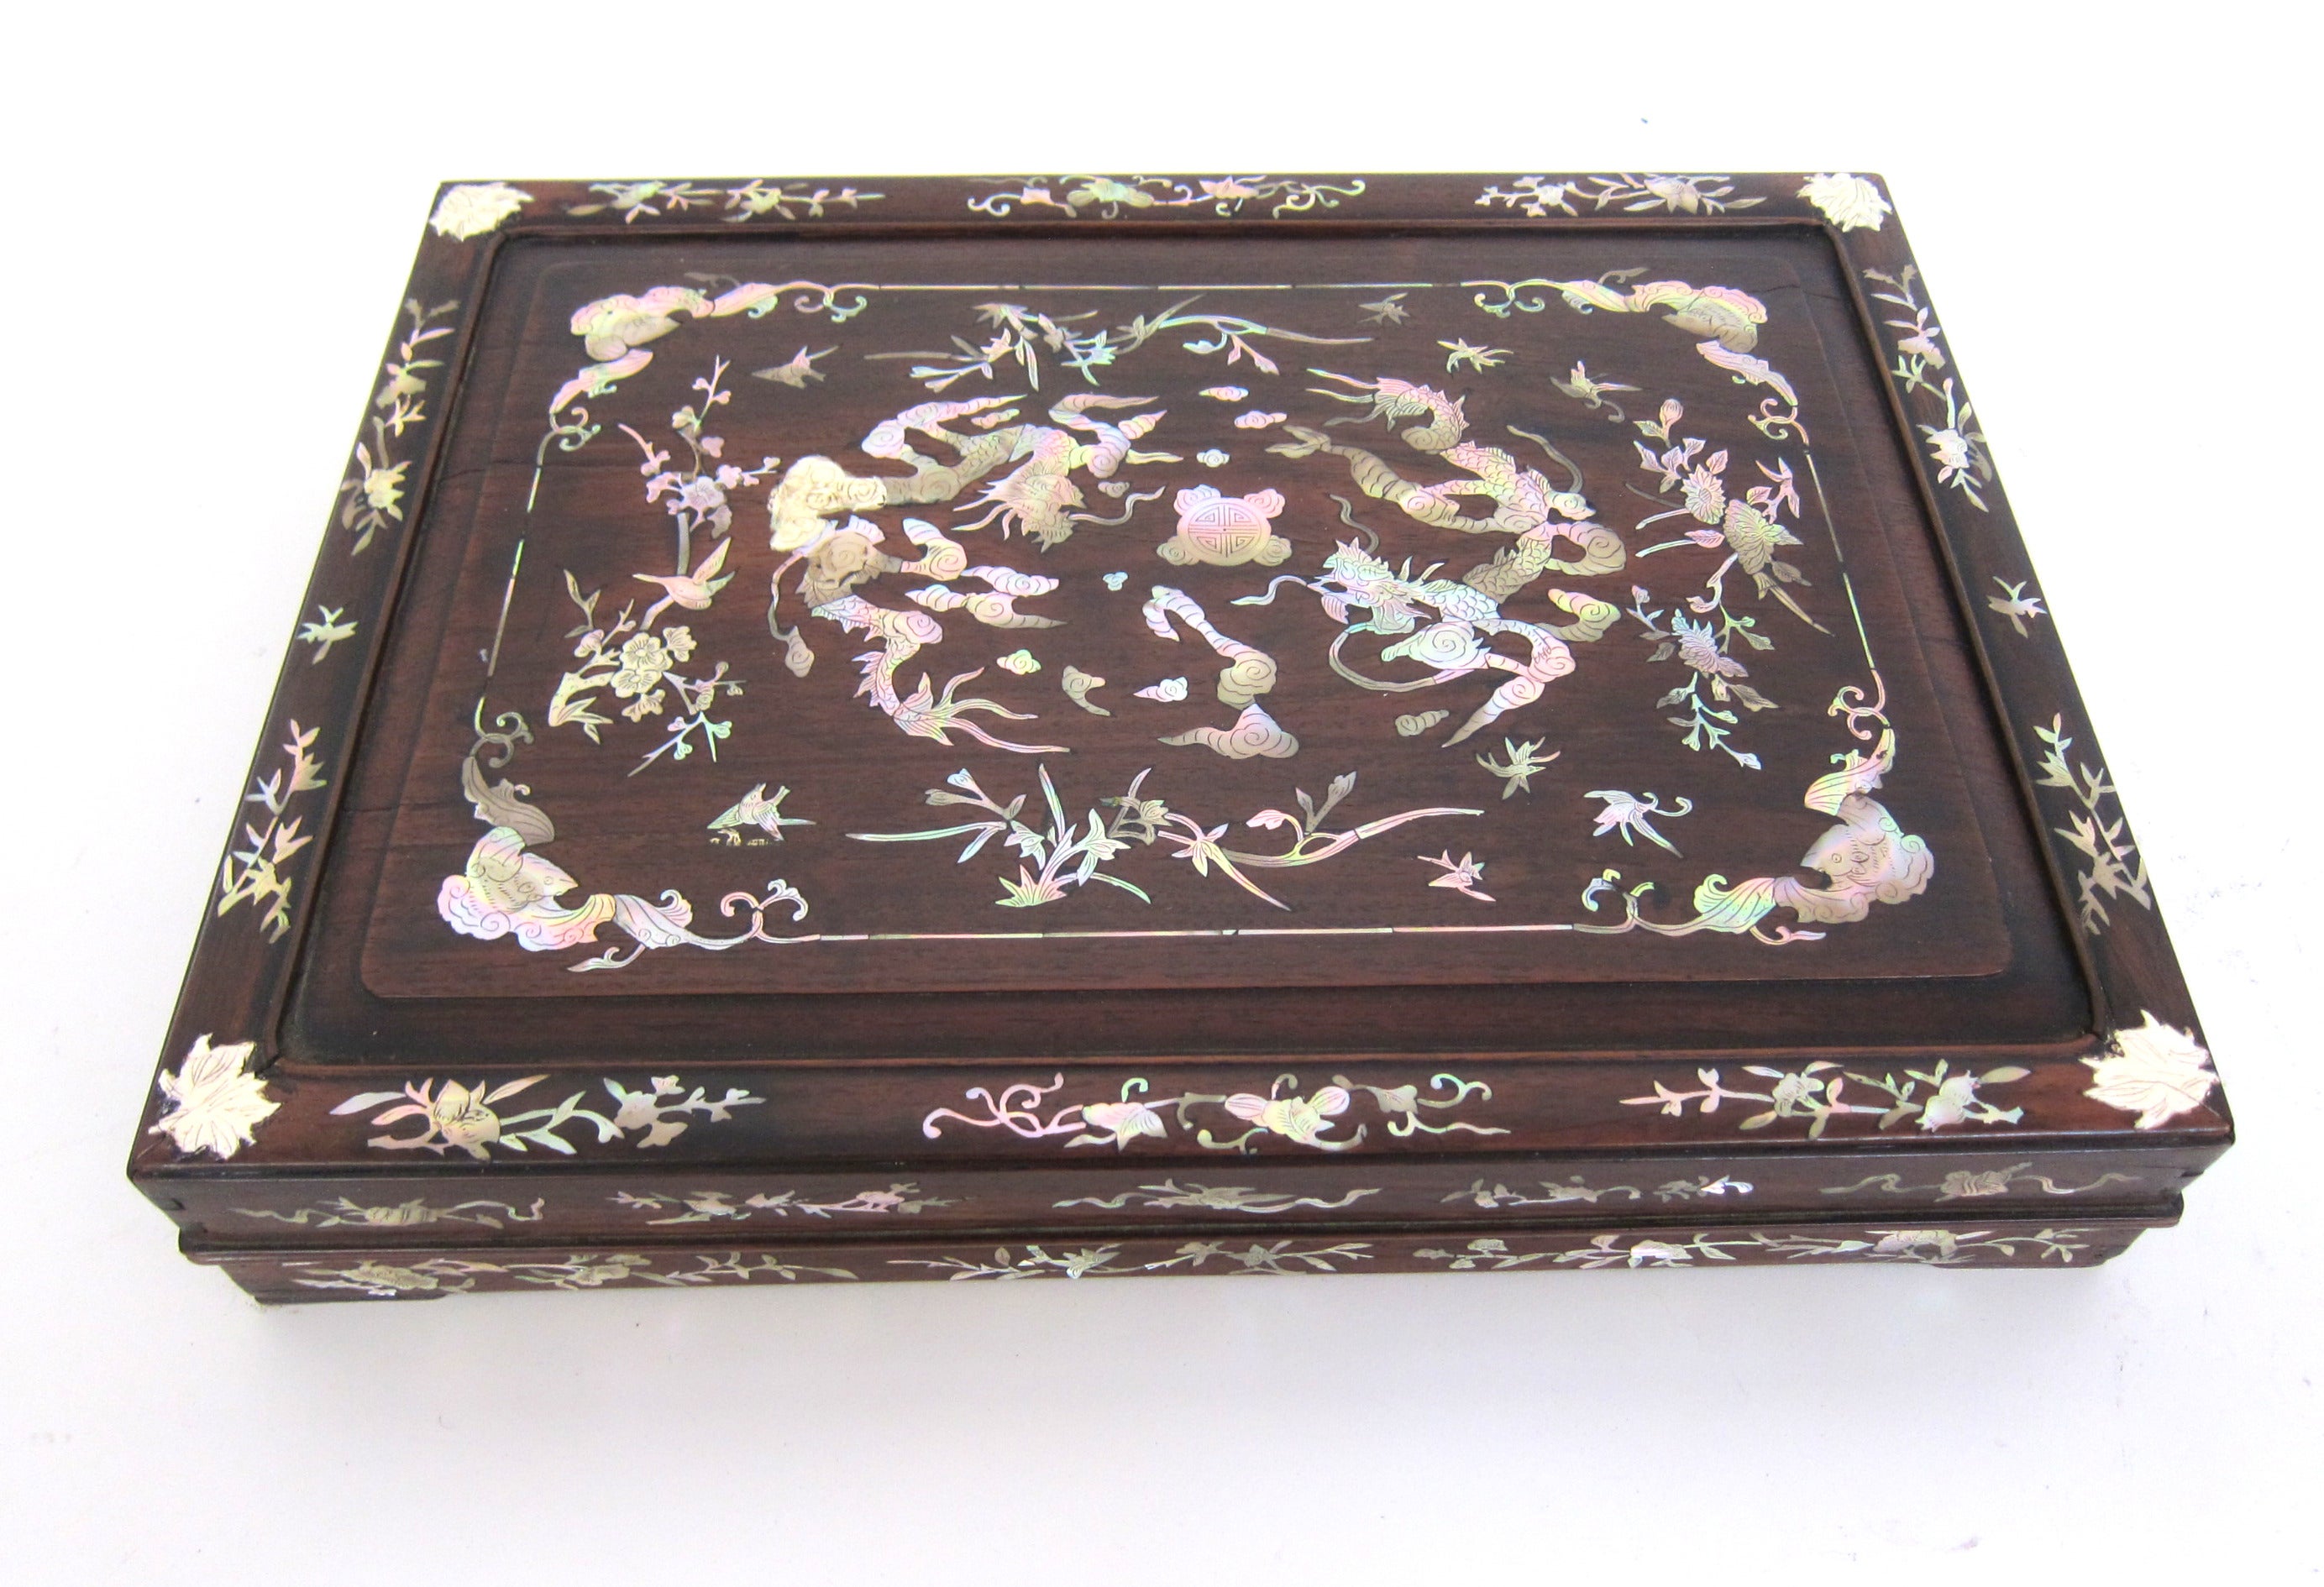 Chinese Mother-of-Pearl Inlay Box W Dragon and Bat Design